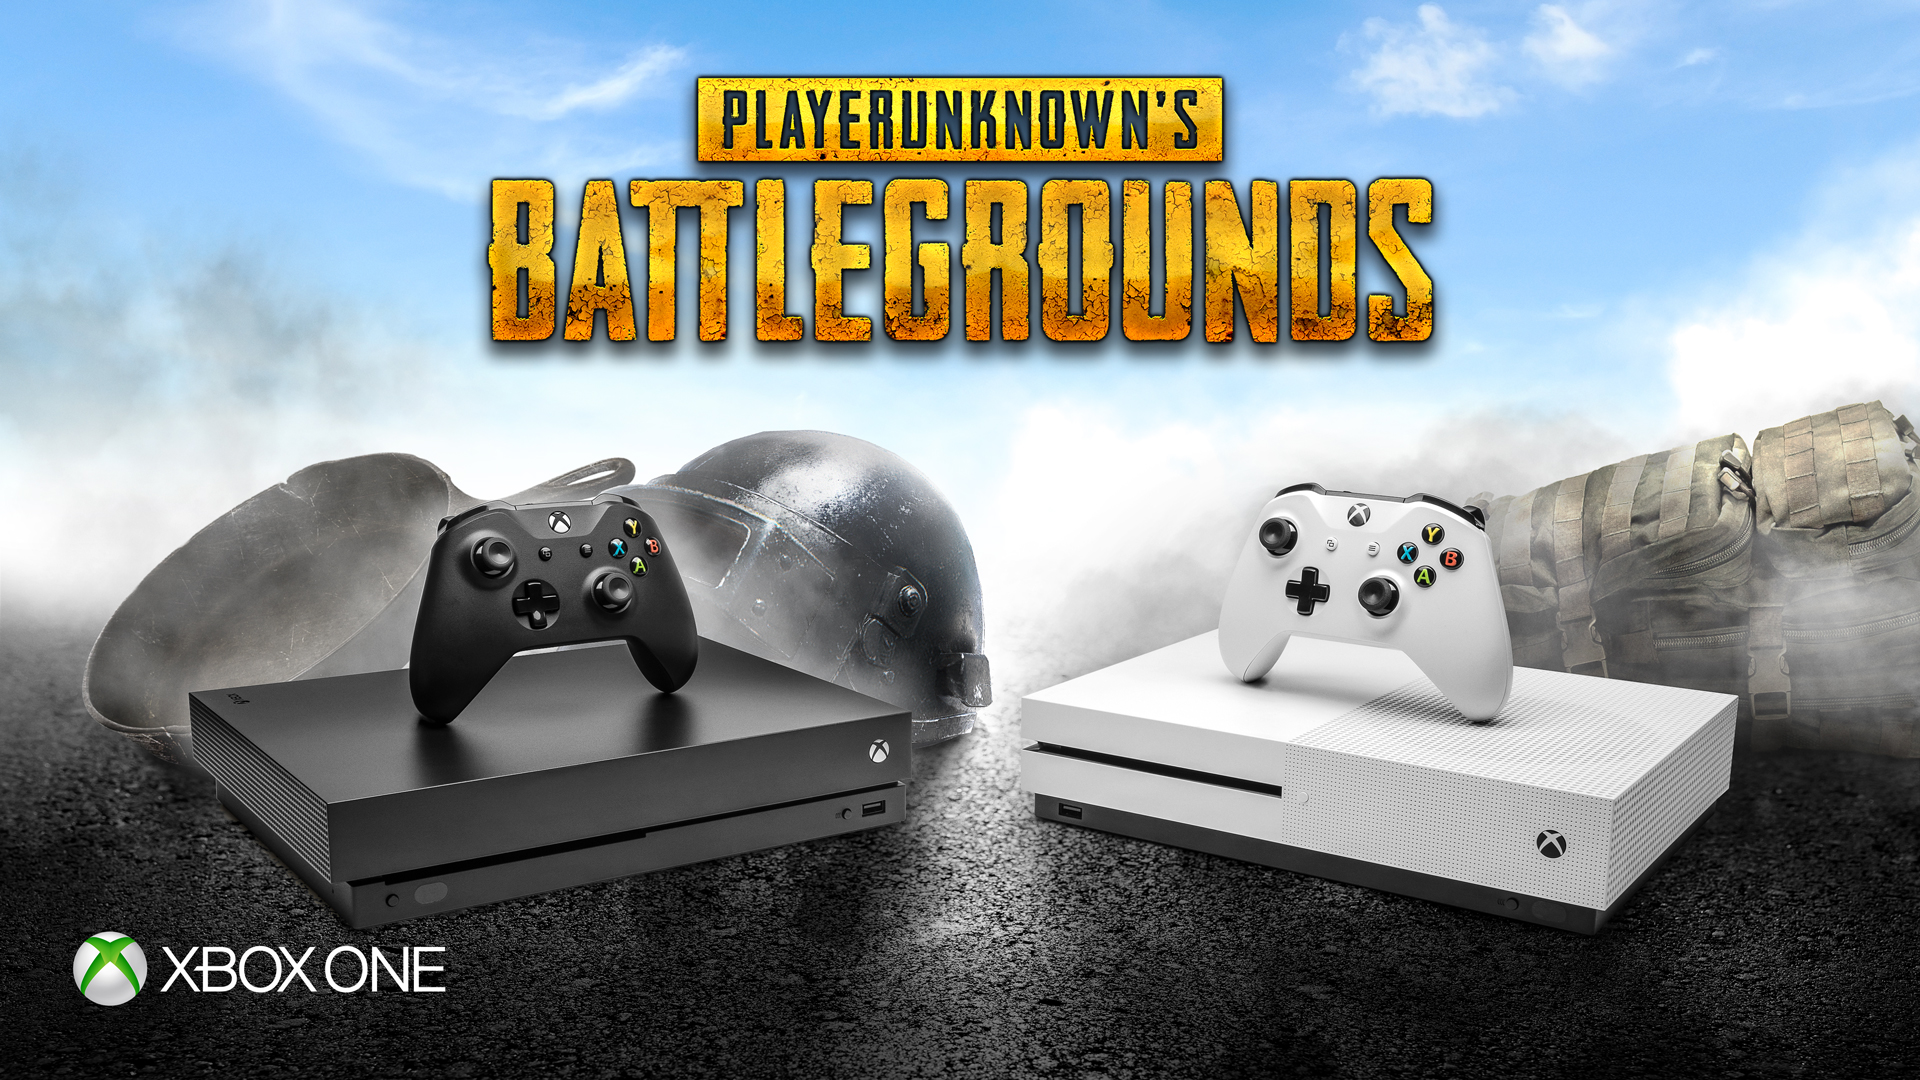 Sixth Update Patch To Be Released For Xbox One Version Of PUBG